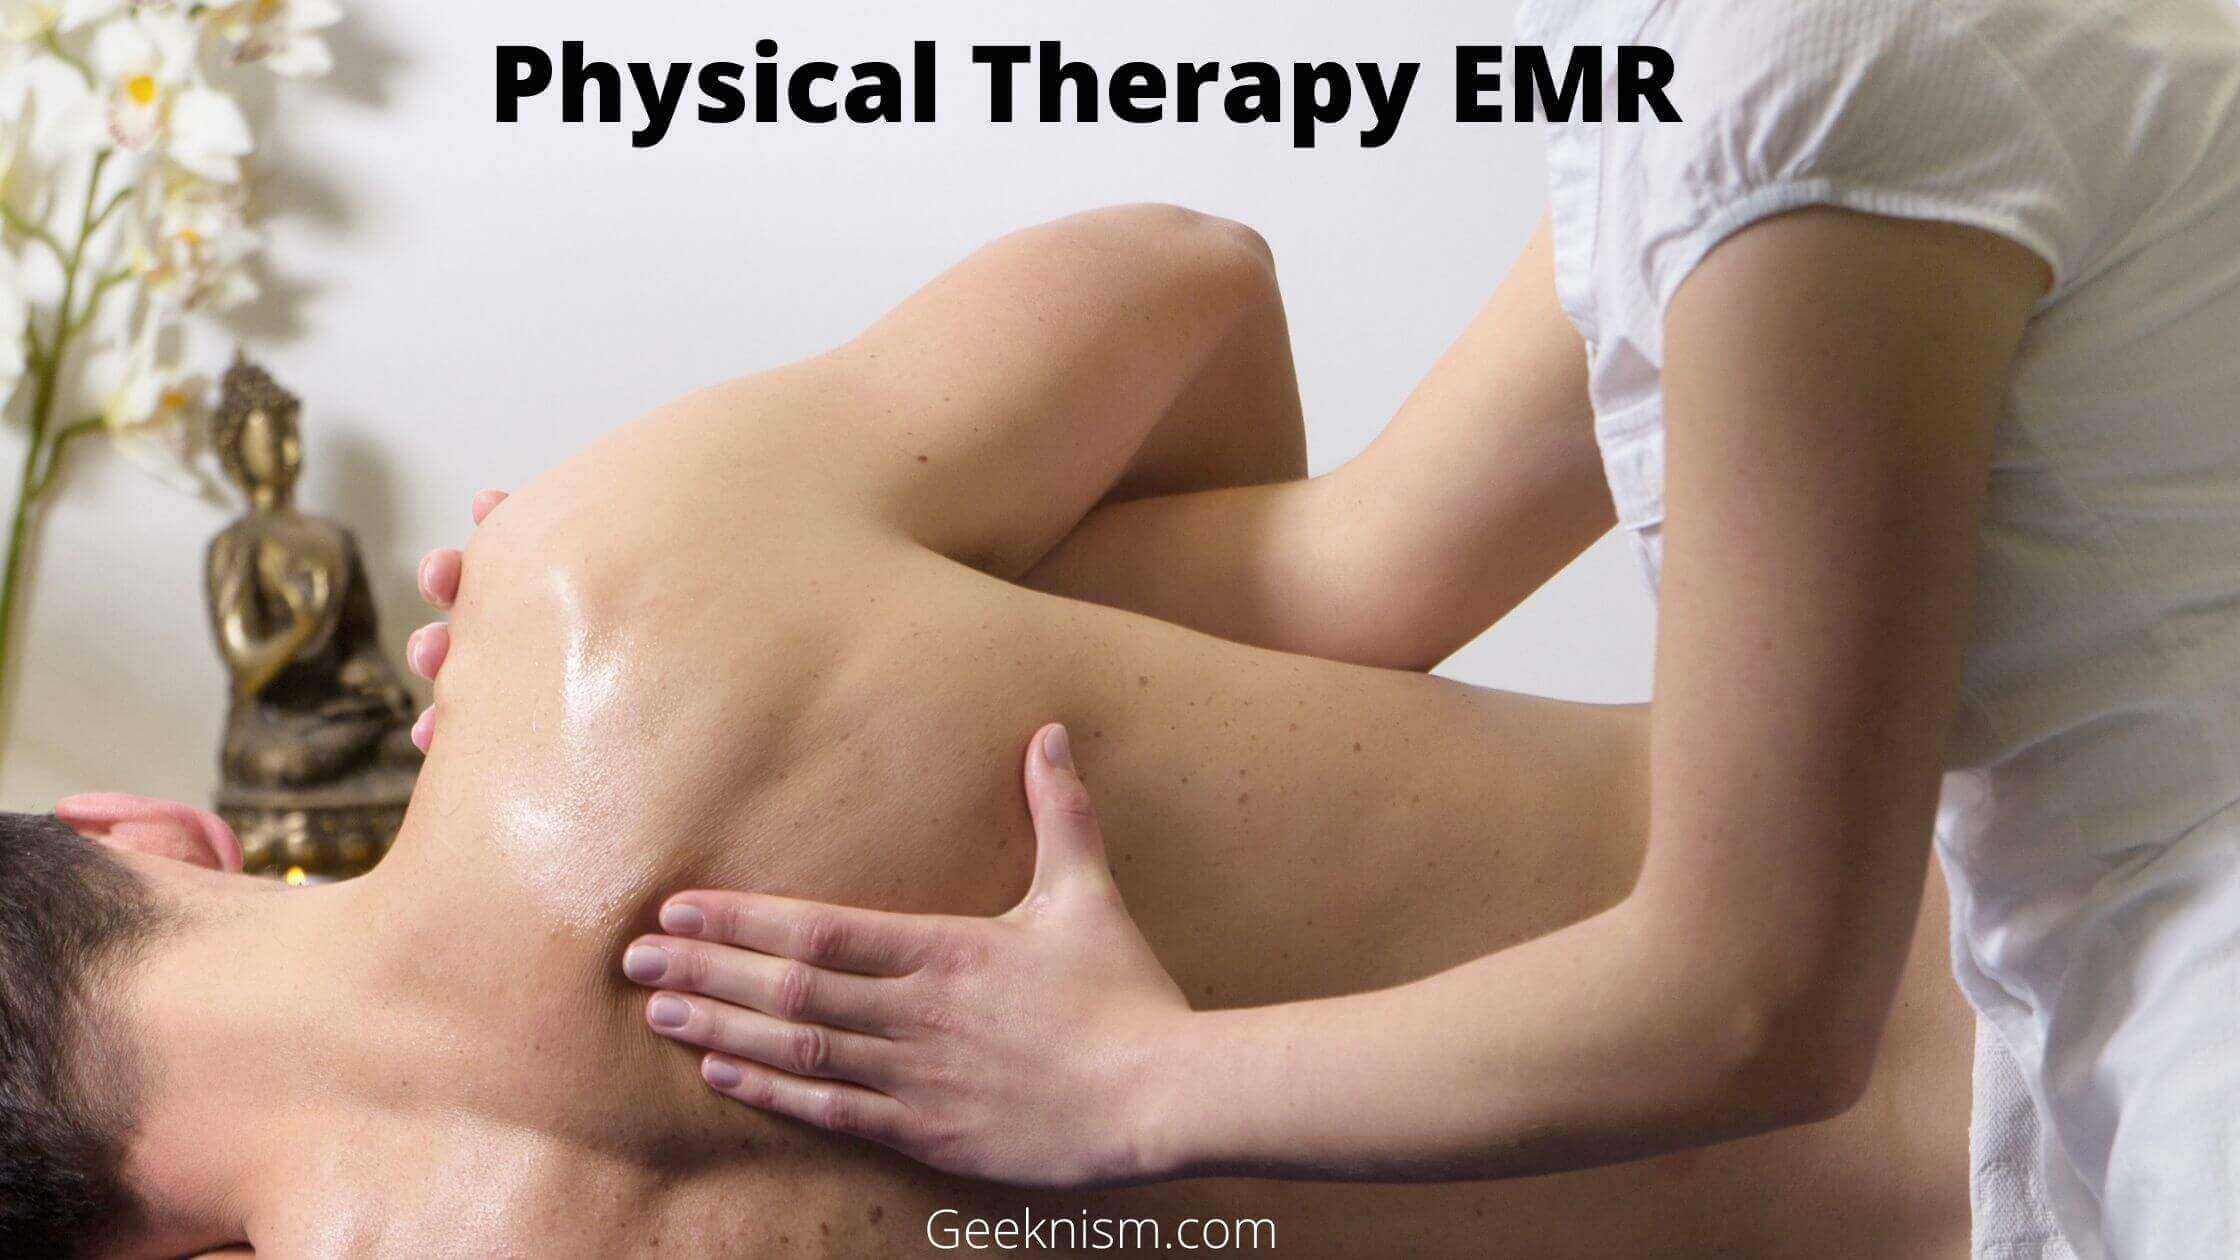 Enhance Your Physical Therapy Practice with a Top EMR